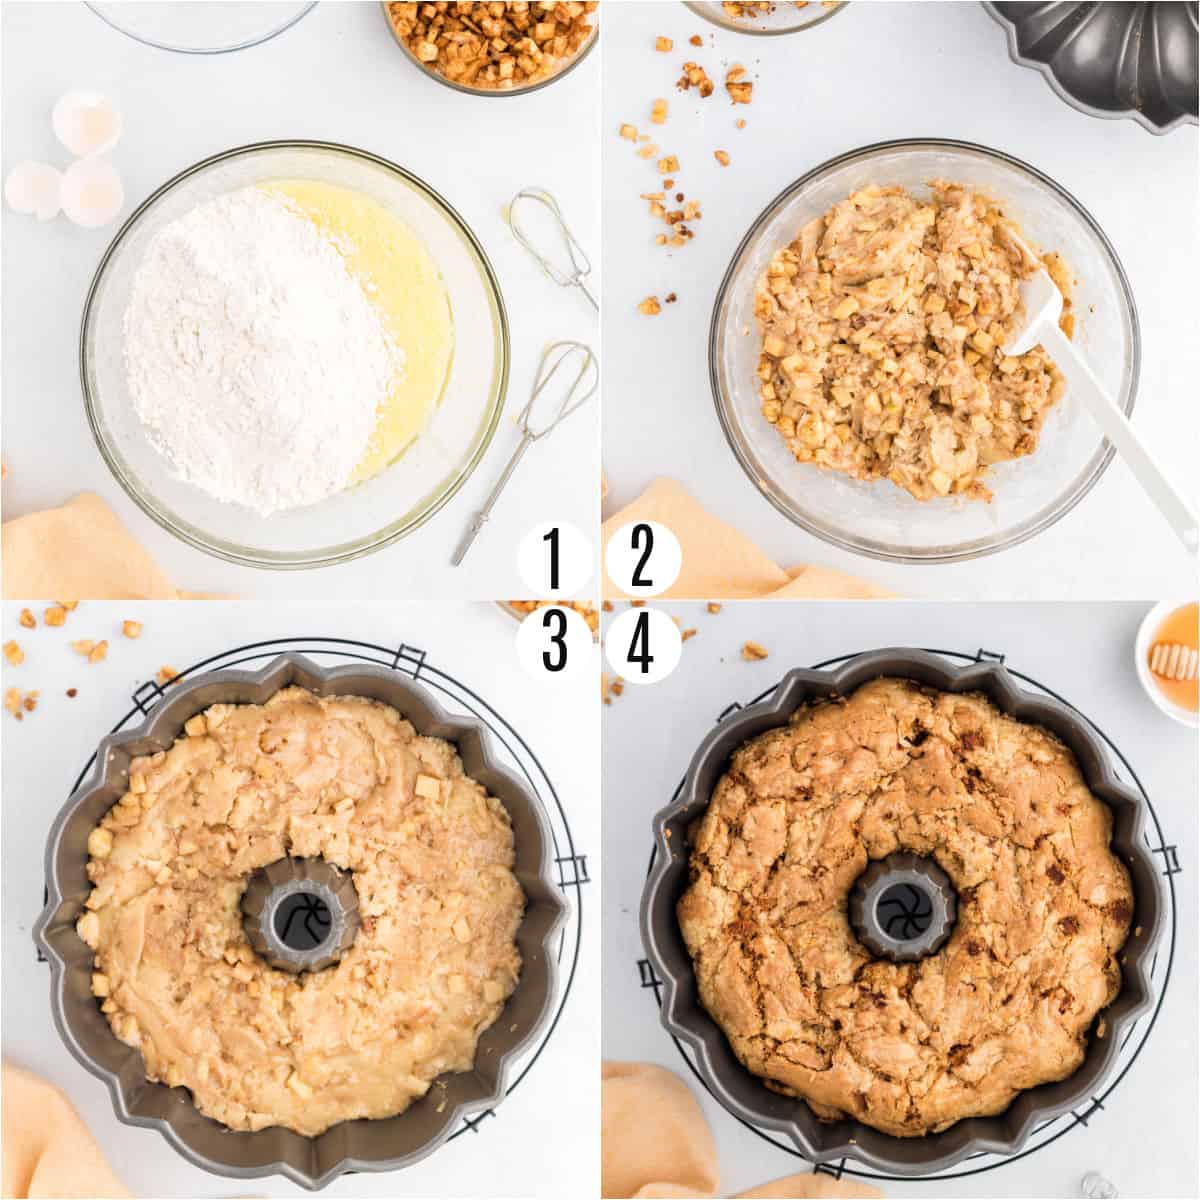 Step by step photos showing how to make apple cake in a bundt pan.